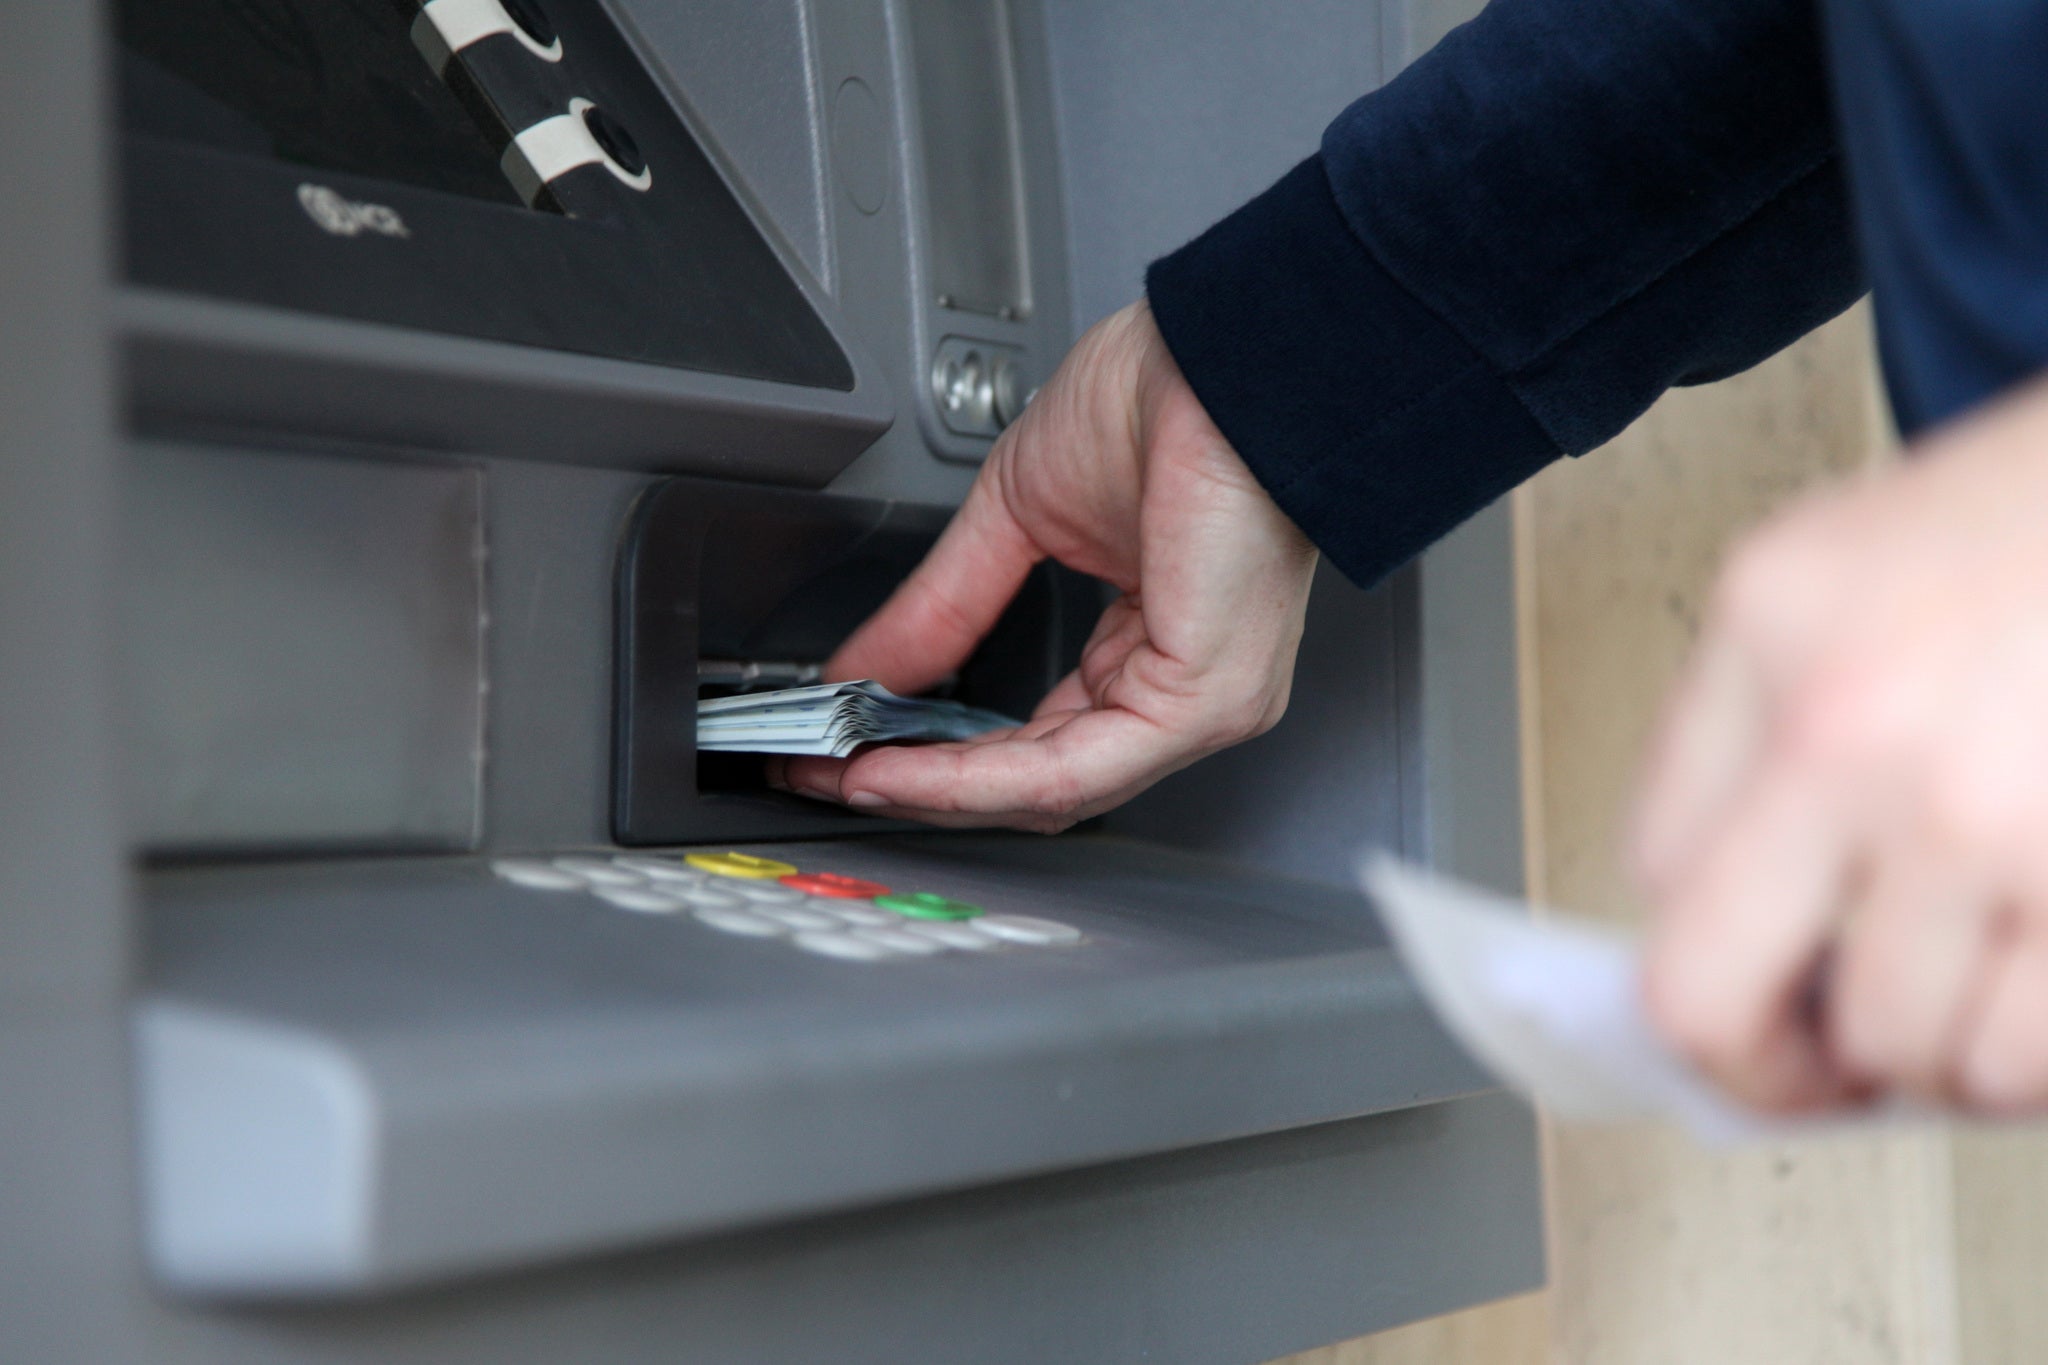 The cashpoint was eventually shut down after staff were notified of the fault